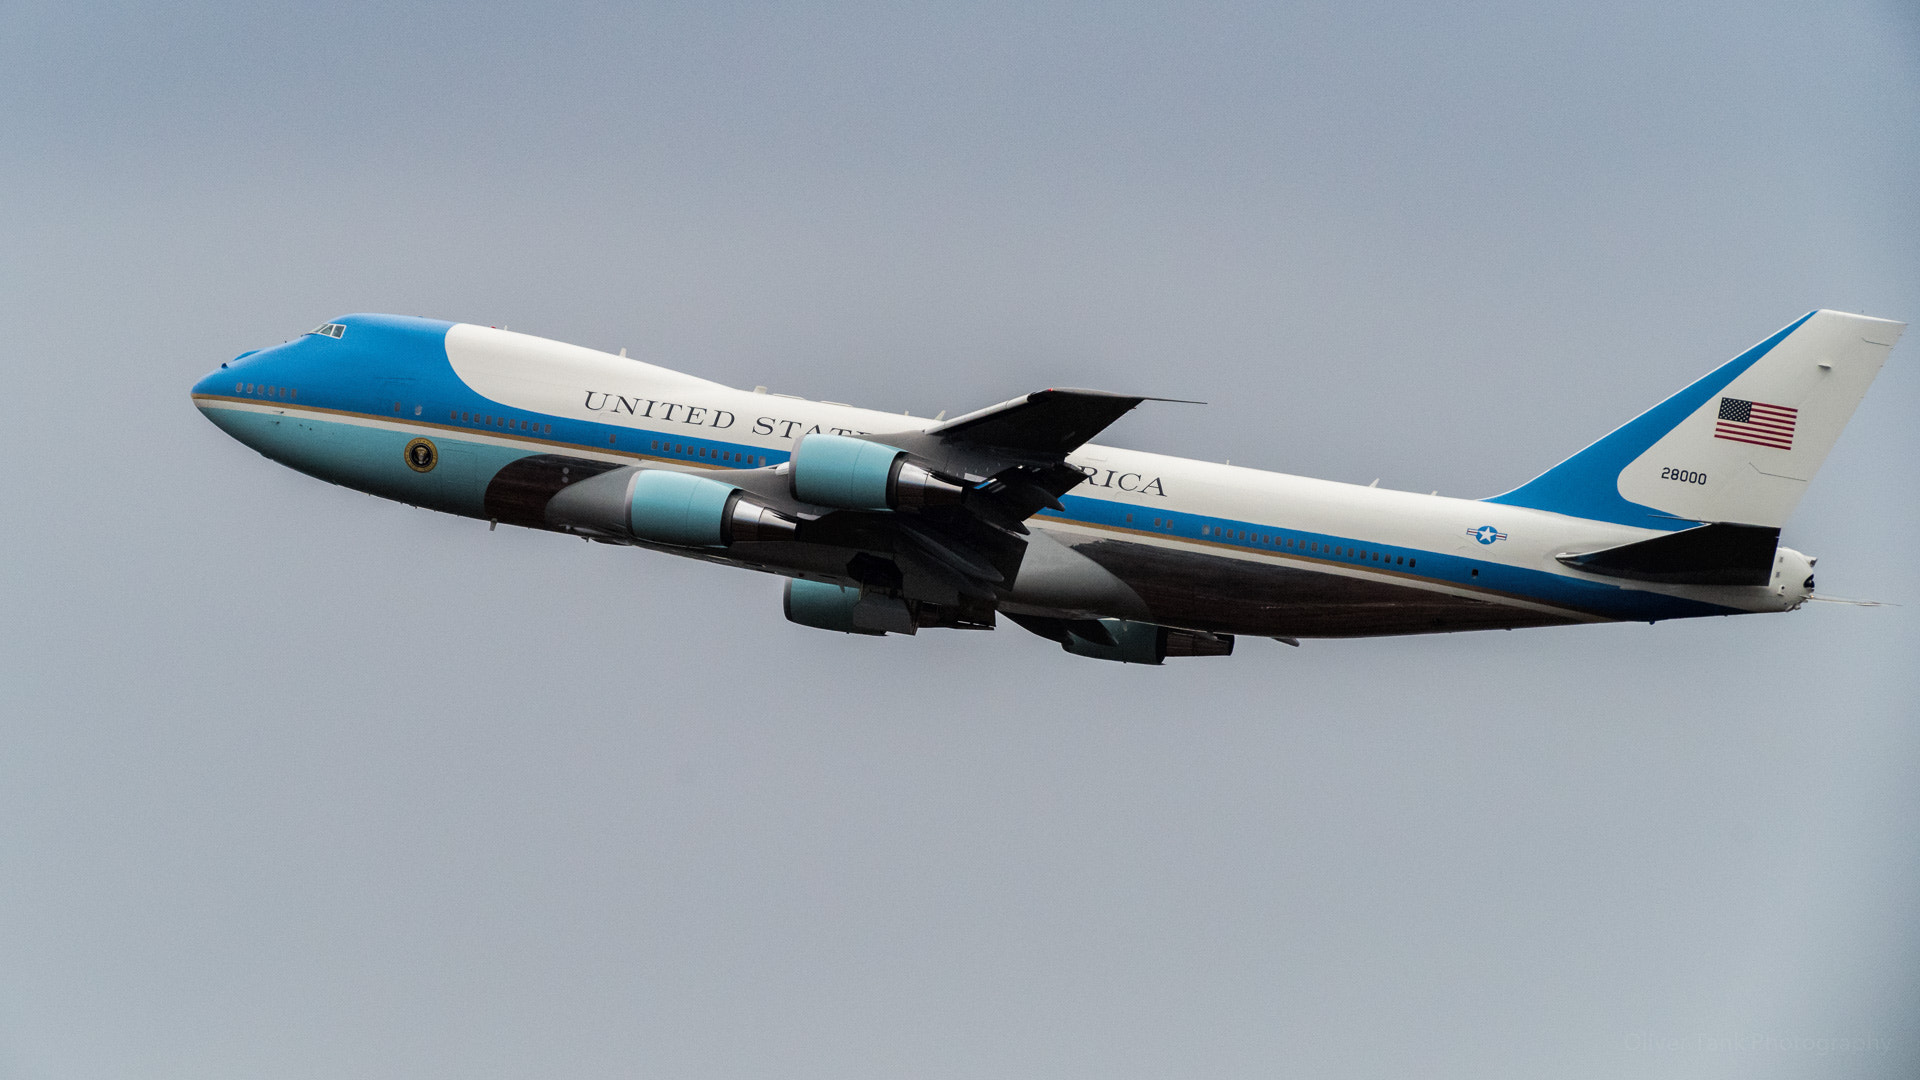 Pentax K-1 sample photo. Obama in germany/berlin airforceone b747 photography